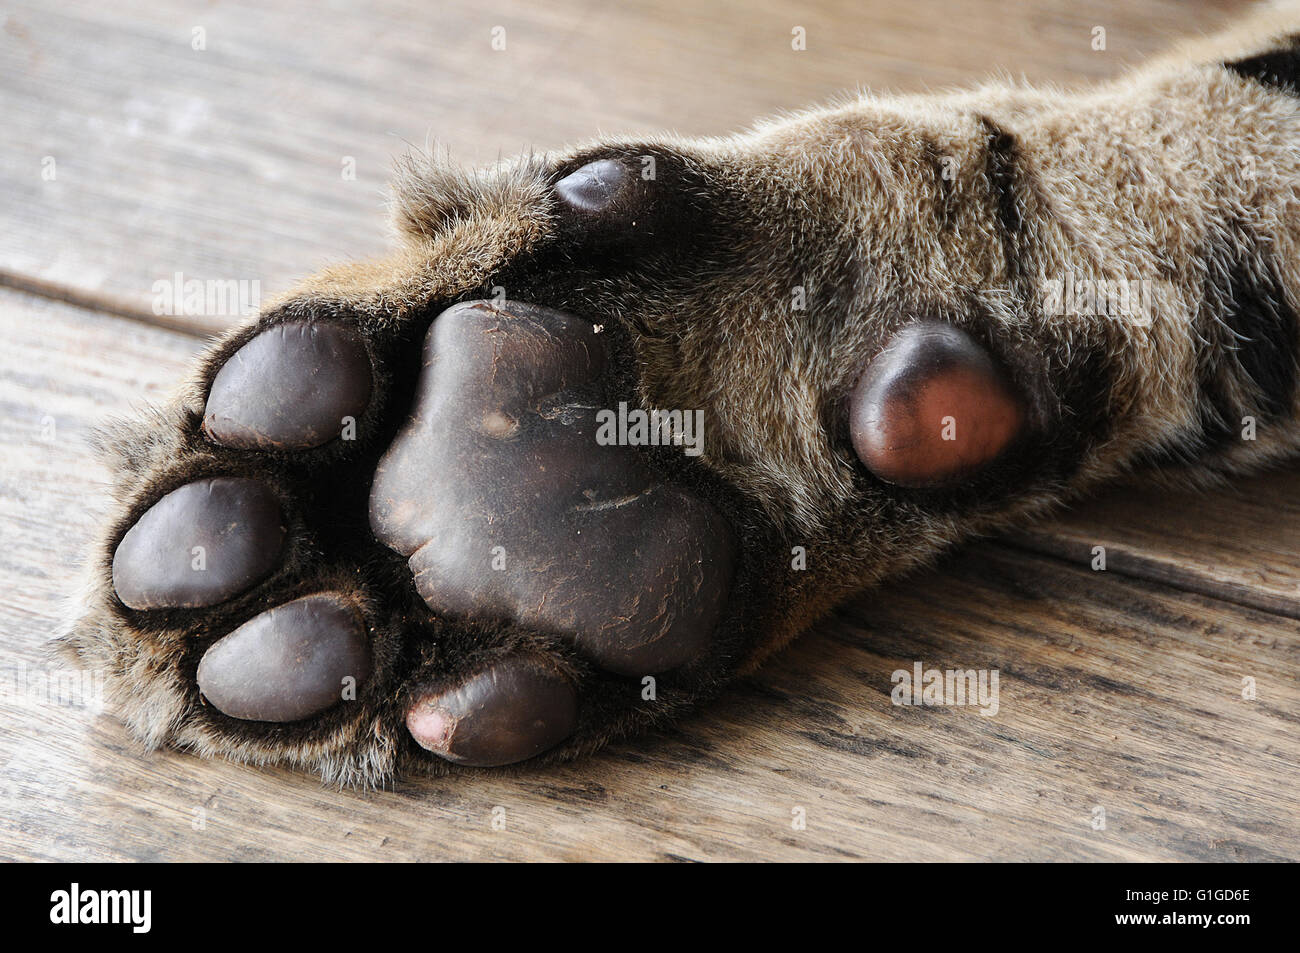 Tiger Paw High Resolution Stock Photography and Images - Alamy